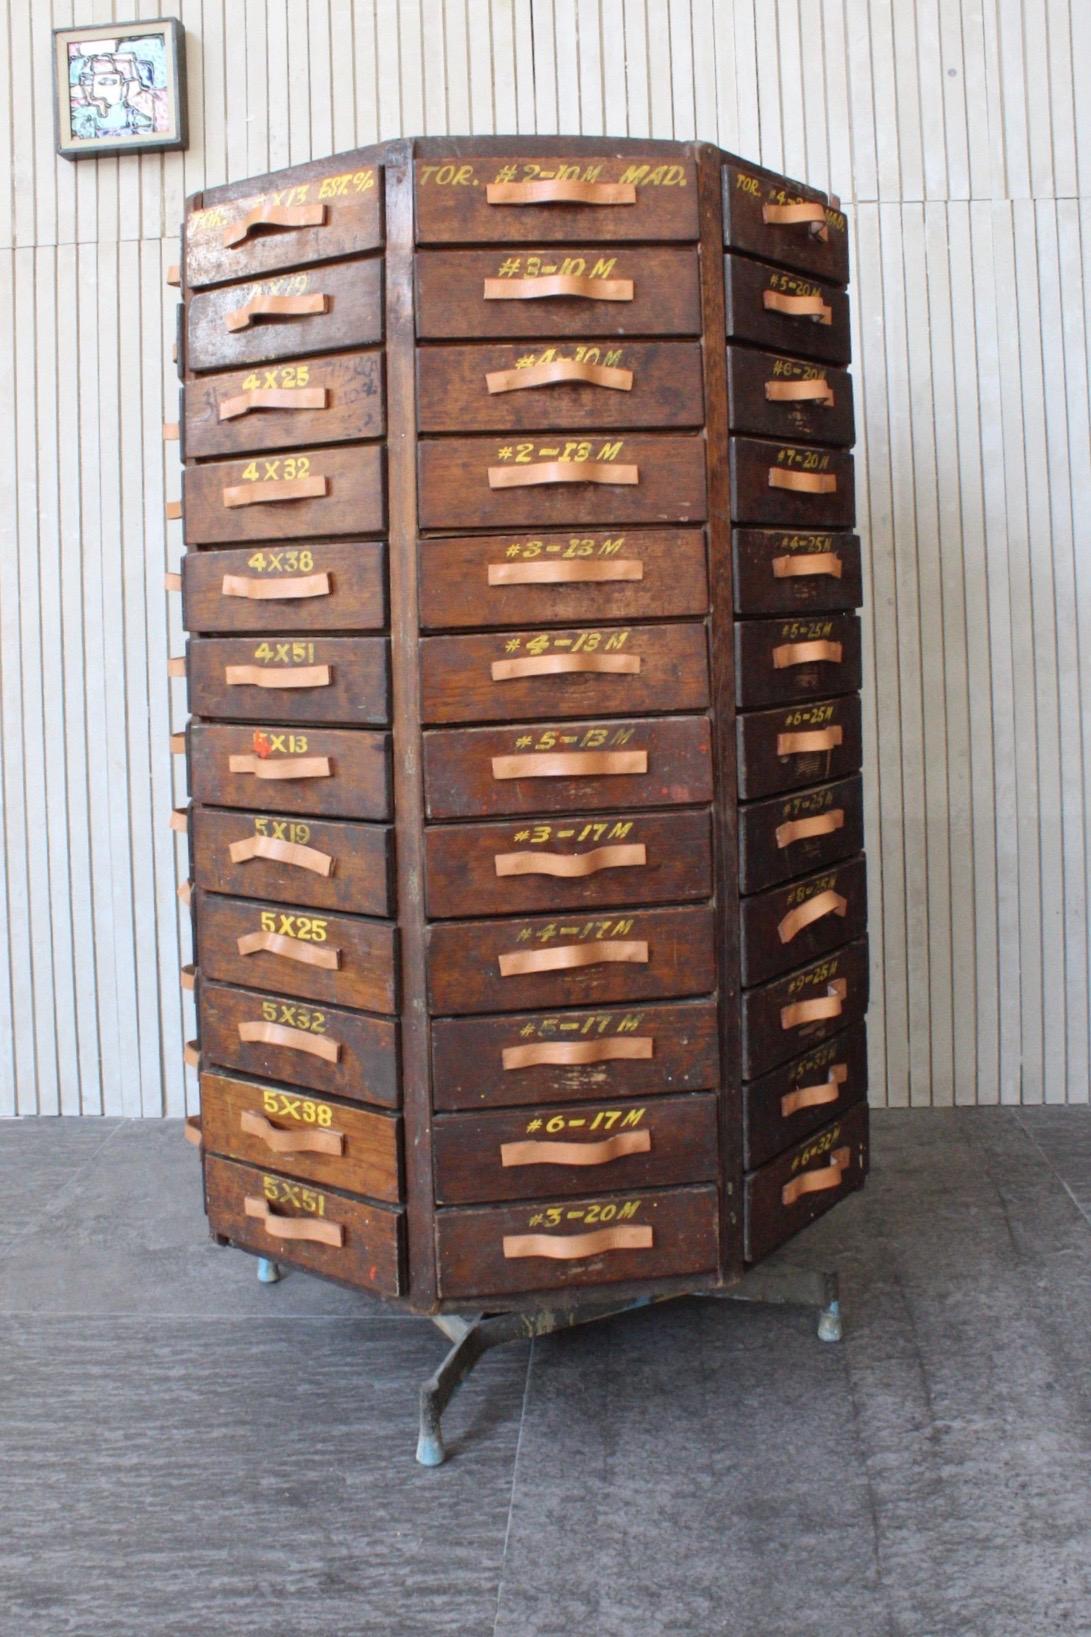 The piece is made at the end of the 1960s, it was part of the fixed assets of a hardware store and there they stored screws, it is made of pine with 96 drawers in a trapezoid shape, the handles are leather (new made in our workshop), the rotation is